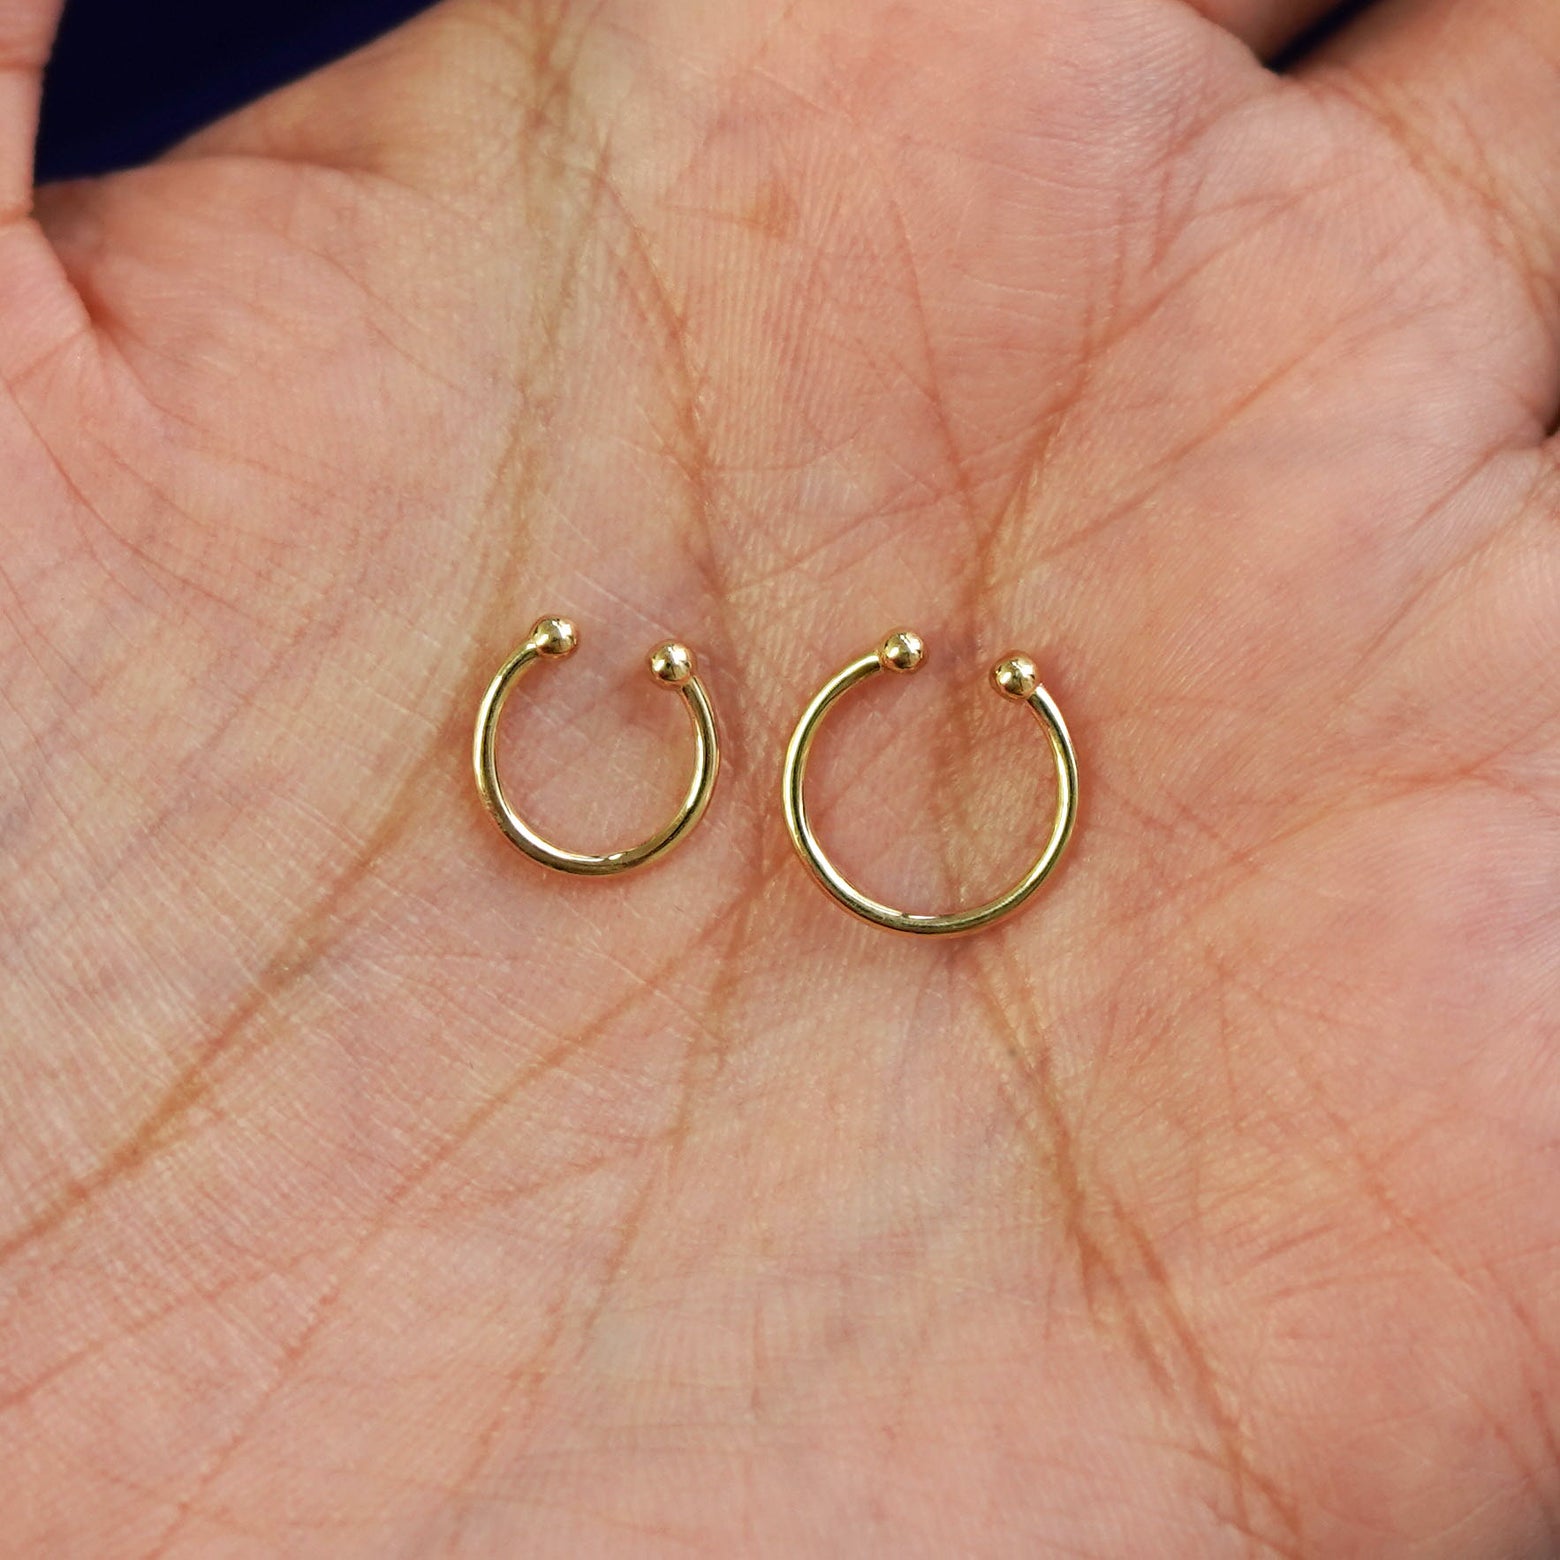 A model's palm holding two versions of the non-pierced Line Septum showing the 8mm and 10mm sizes